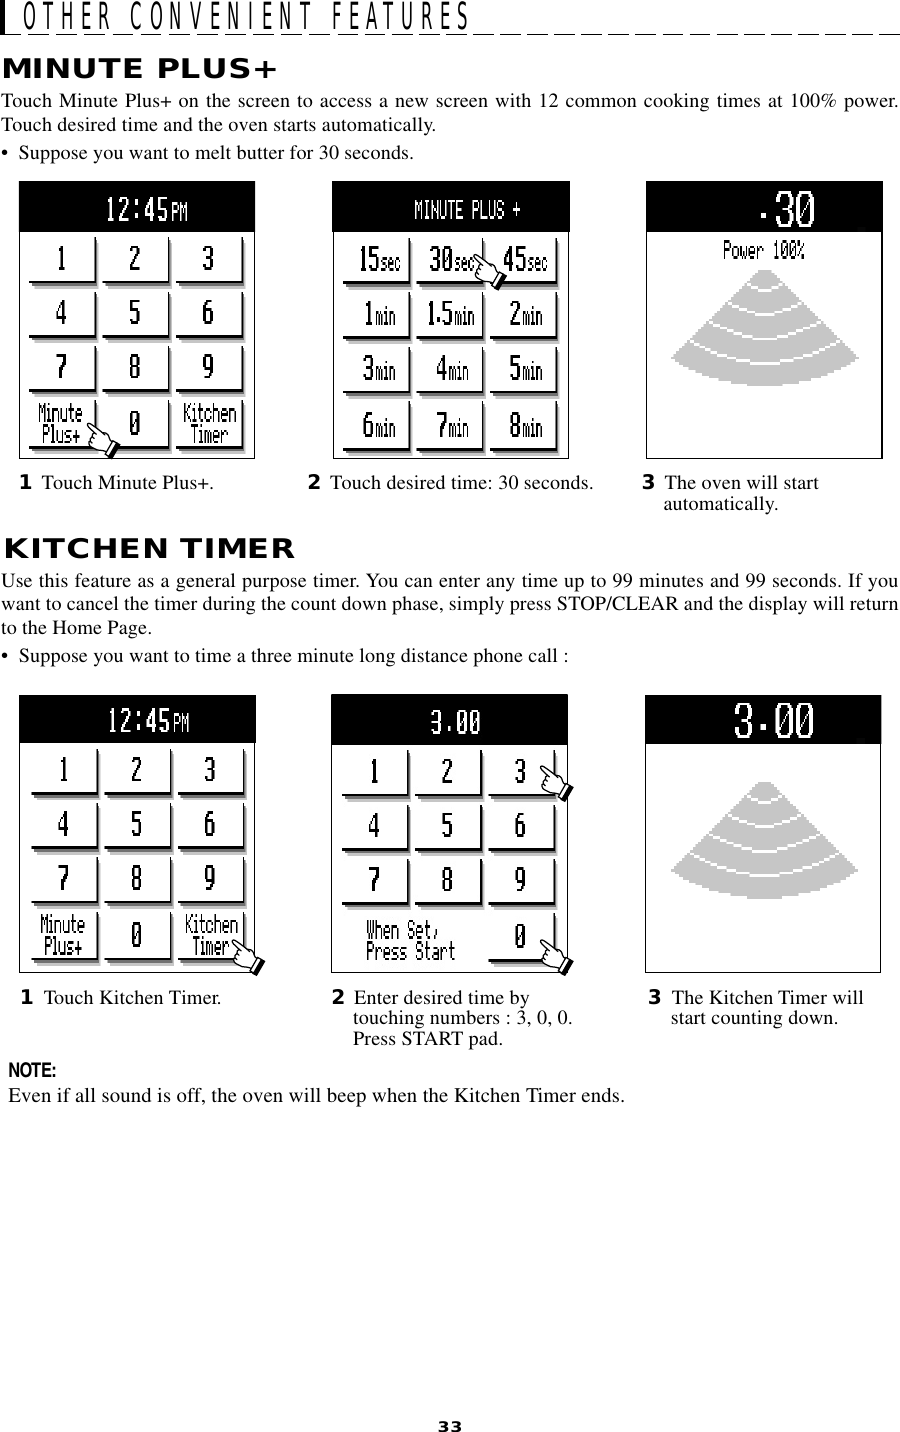 33OTHER CONVENIENT FEATURESKITCHEN TIMERUse this feature as a general purpose timer. You can enter any time up to 99 minutes and 99 seconds. If youwant to cancel the timer during the count down phase, simply press STOP/CLEAR and the display will returnto the Home Page.• Suppose you want to time a three minute long distance phone call :MINUTE PLUS+Touch Minute Plus+ on the screen to access a new screen with 12 common cooking times at 100% power.Touch desired time and the oven starts automatically.•  Suppose you want to melt butter for 30 seconds.1Touch Kitchen Timer. 3The Kitchen Timer willstart counting down.NOTE:Even if all sound is off, the oven will beep when the Kitchen Timer ends.2Enter desired time bytouching numbers : 3, 0, 0.Press START pad.2Touch desired time: 30 seconds.1Touch Minute Plus+. 3The oven will startautomatically.